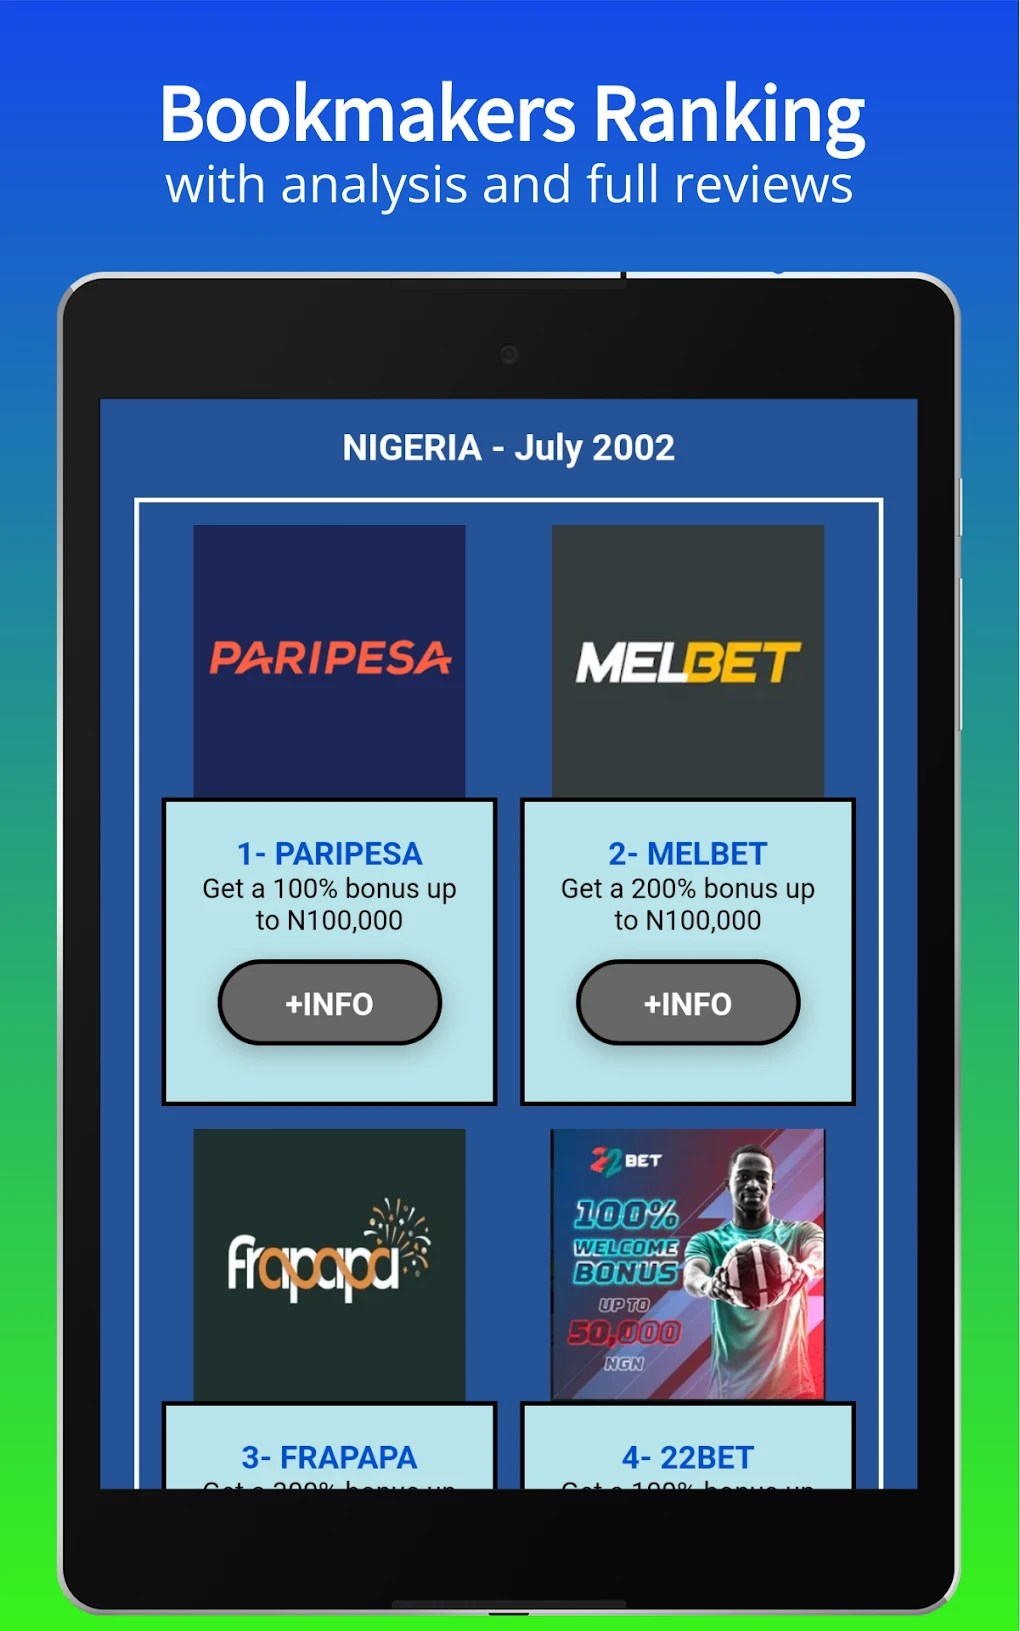 Get In On The Action At Paripesa, India's Best Online Casino